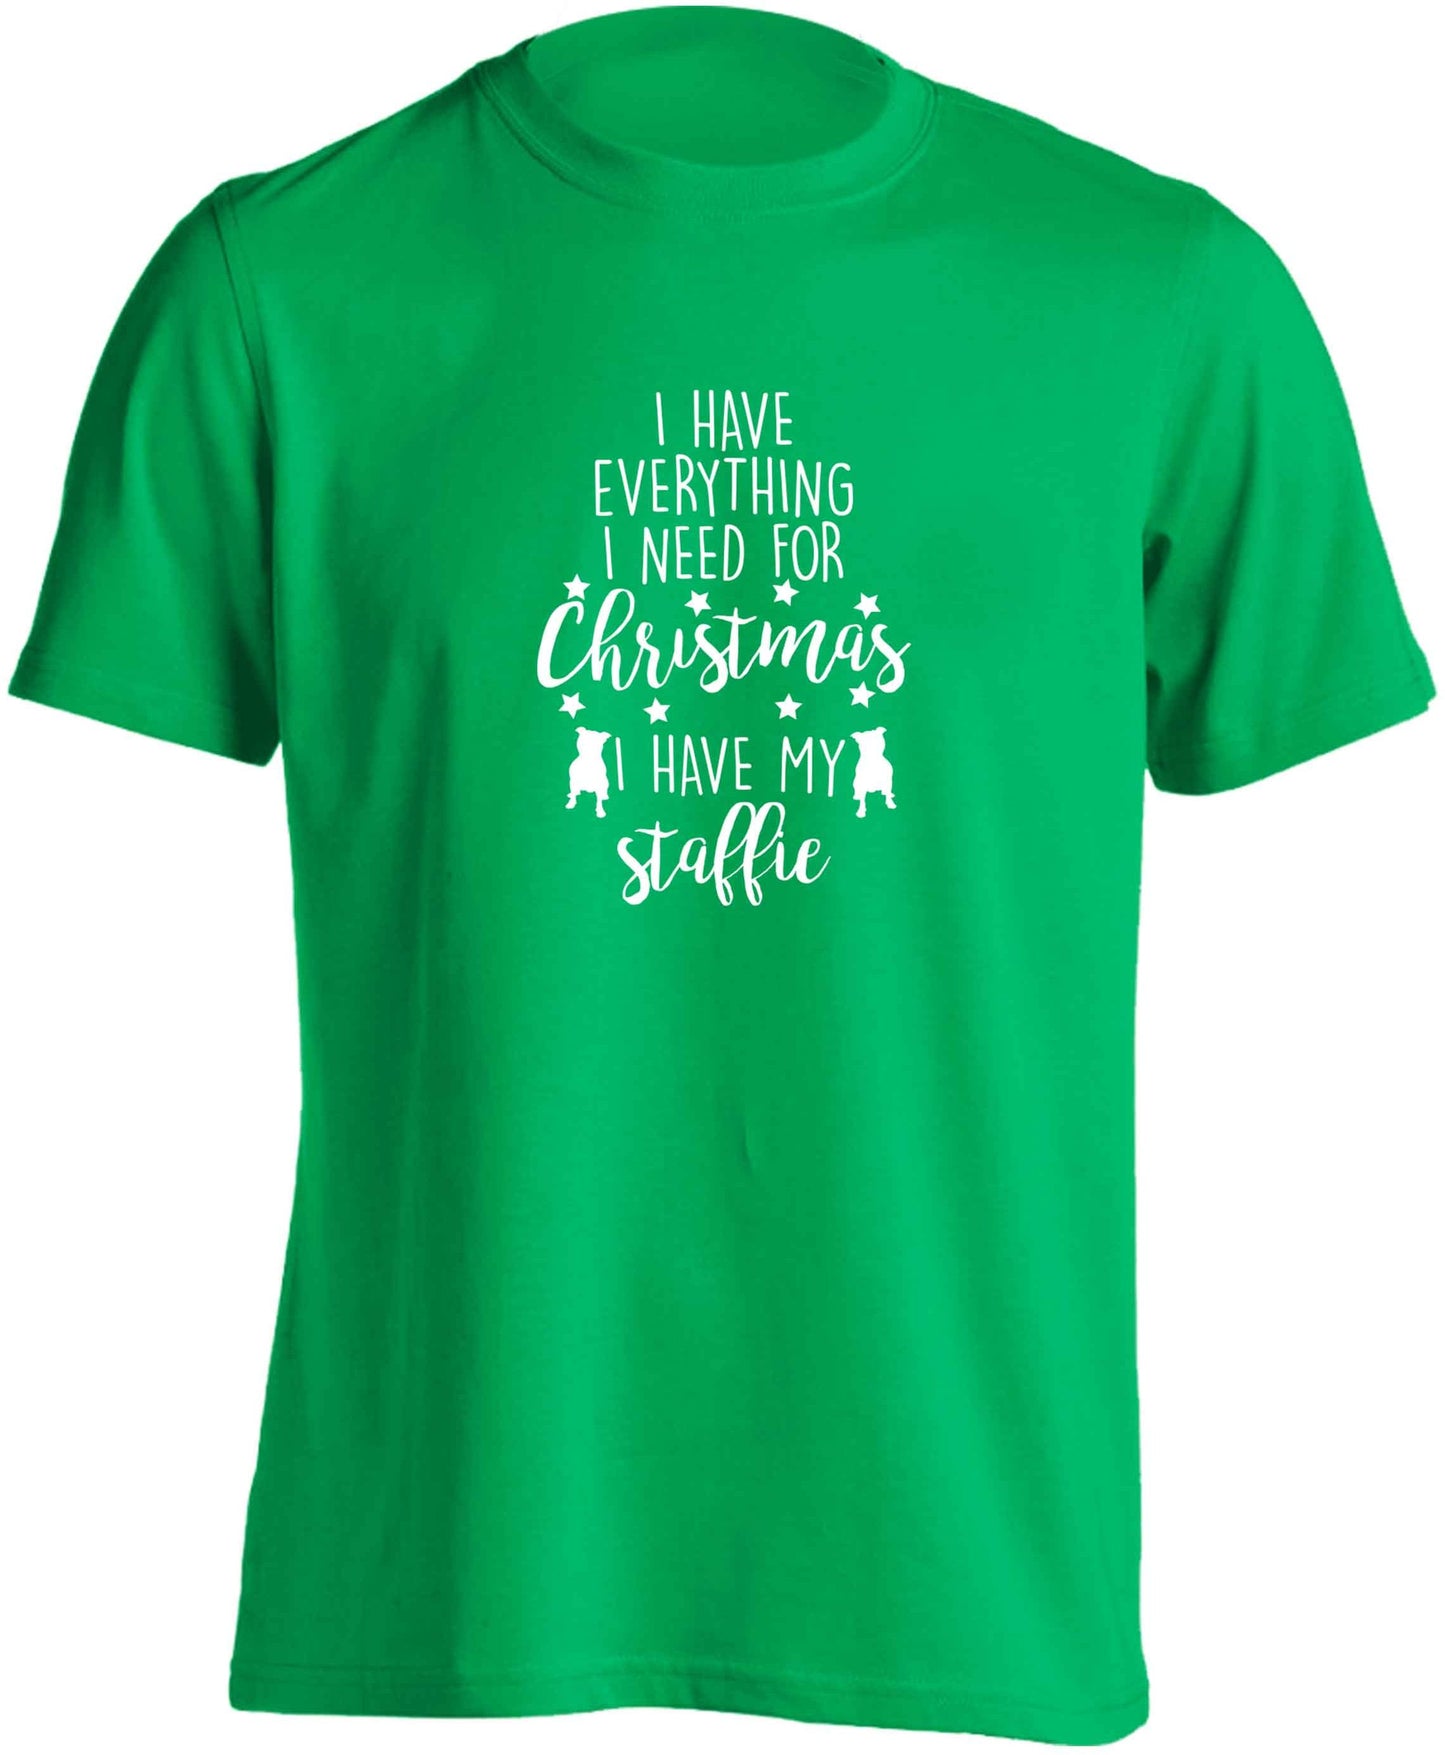 I have everything I need for Christmas I have my staffie adults unisex green Tshirt 2XL